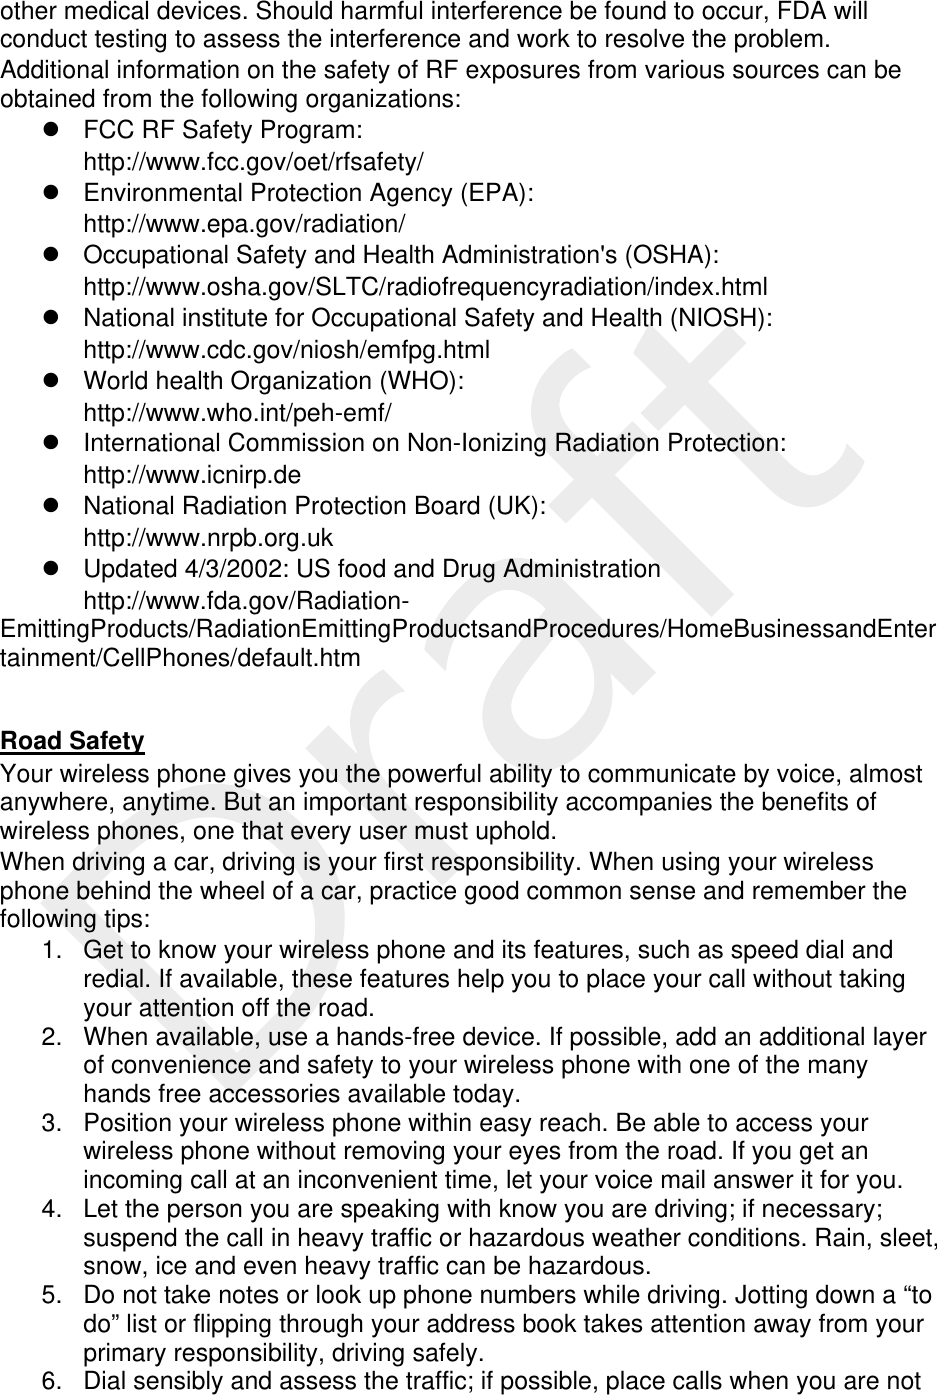  other medical devices. Should harmful interference be found to occur, FDA will conduct testing to assess the interference and work to resolve the problem. Additional information on the safety of RF exposures from various sources can be obtained from the following organizations:   FCC RF Safety Program:  http://www.fcc.gov/oet/rfsafety/   Environmental Protection Agency (EPA):  http://www.epa.gov/radiation/   Occupational Safety and Health Administration&apos;s (OSHA):         http://www.osha.gov/SLTC/radiofrequencyradiation/index.html   National institute for Occupational Safety and Health (NIOSH):  http://www.cdc.gov/niosh/emfpg.html    World health Organization (WHO):  http://www.who.int/peh-emf/   International Commission on Non-Ionizing Radiation Protection:  http://www.icnirp.de   National Radiation Protection Board (UK):  http://www.nrpb.org.uk   Updated 4/3/2002: US food and Drug Administration  http://www.fda.gov/Radiation-EmittingProducts/RadiationEmittingProductsandProcedures/HomeBusinessandEntertainment/CellPhones/default.htm  Road Safety Your wireless phone gives you the powerful ability to communicate by voice, almost anywhere, anytime. But an important responsibility accompanies the benefits of wireless phones, one that every user must uphold. When driving a car, driving is your first responsibility. When using your wireless phone behind the wheel of a car, practice good common sense and remember the following tips: 1.  Get to know your wireless phone and its features, such as speed dial and redial. If available, these features help you to place your call without taking your attention off the road. 2.  When available, use a hands-free device. If possible, add an additional layer of convenience and safety to your wireless phone with one of the many hands free accessories available today. 3.  Position your wireless phone within easy reach. Be able to access your wireless phone without removing your eyes from the road. If you get an incoming call at an inconvenient time, let your voice mail answer it for you. 4.  Let the person you are speaking with know you are driving; if necessary; suspend the call in heavy traffic or hazardous weather conditions. Rain, sleet, snow, ice and even heavy traffic can be hazardous. 5.  Do not take notes or look up phone numbers while driving. Jotting down a “to do” list or flipping through your address book takes attention away from your primary responsibility, driving safely. 6.  Dial sensibly and assess the traffic; if possible, place calls when you are not 